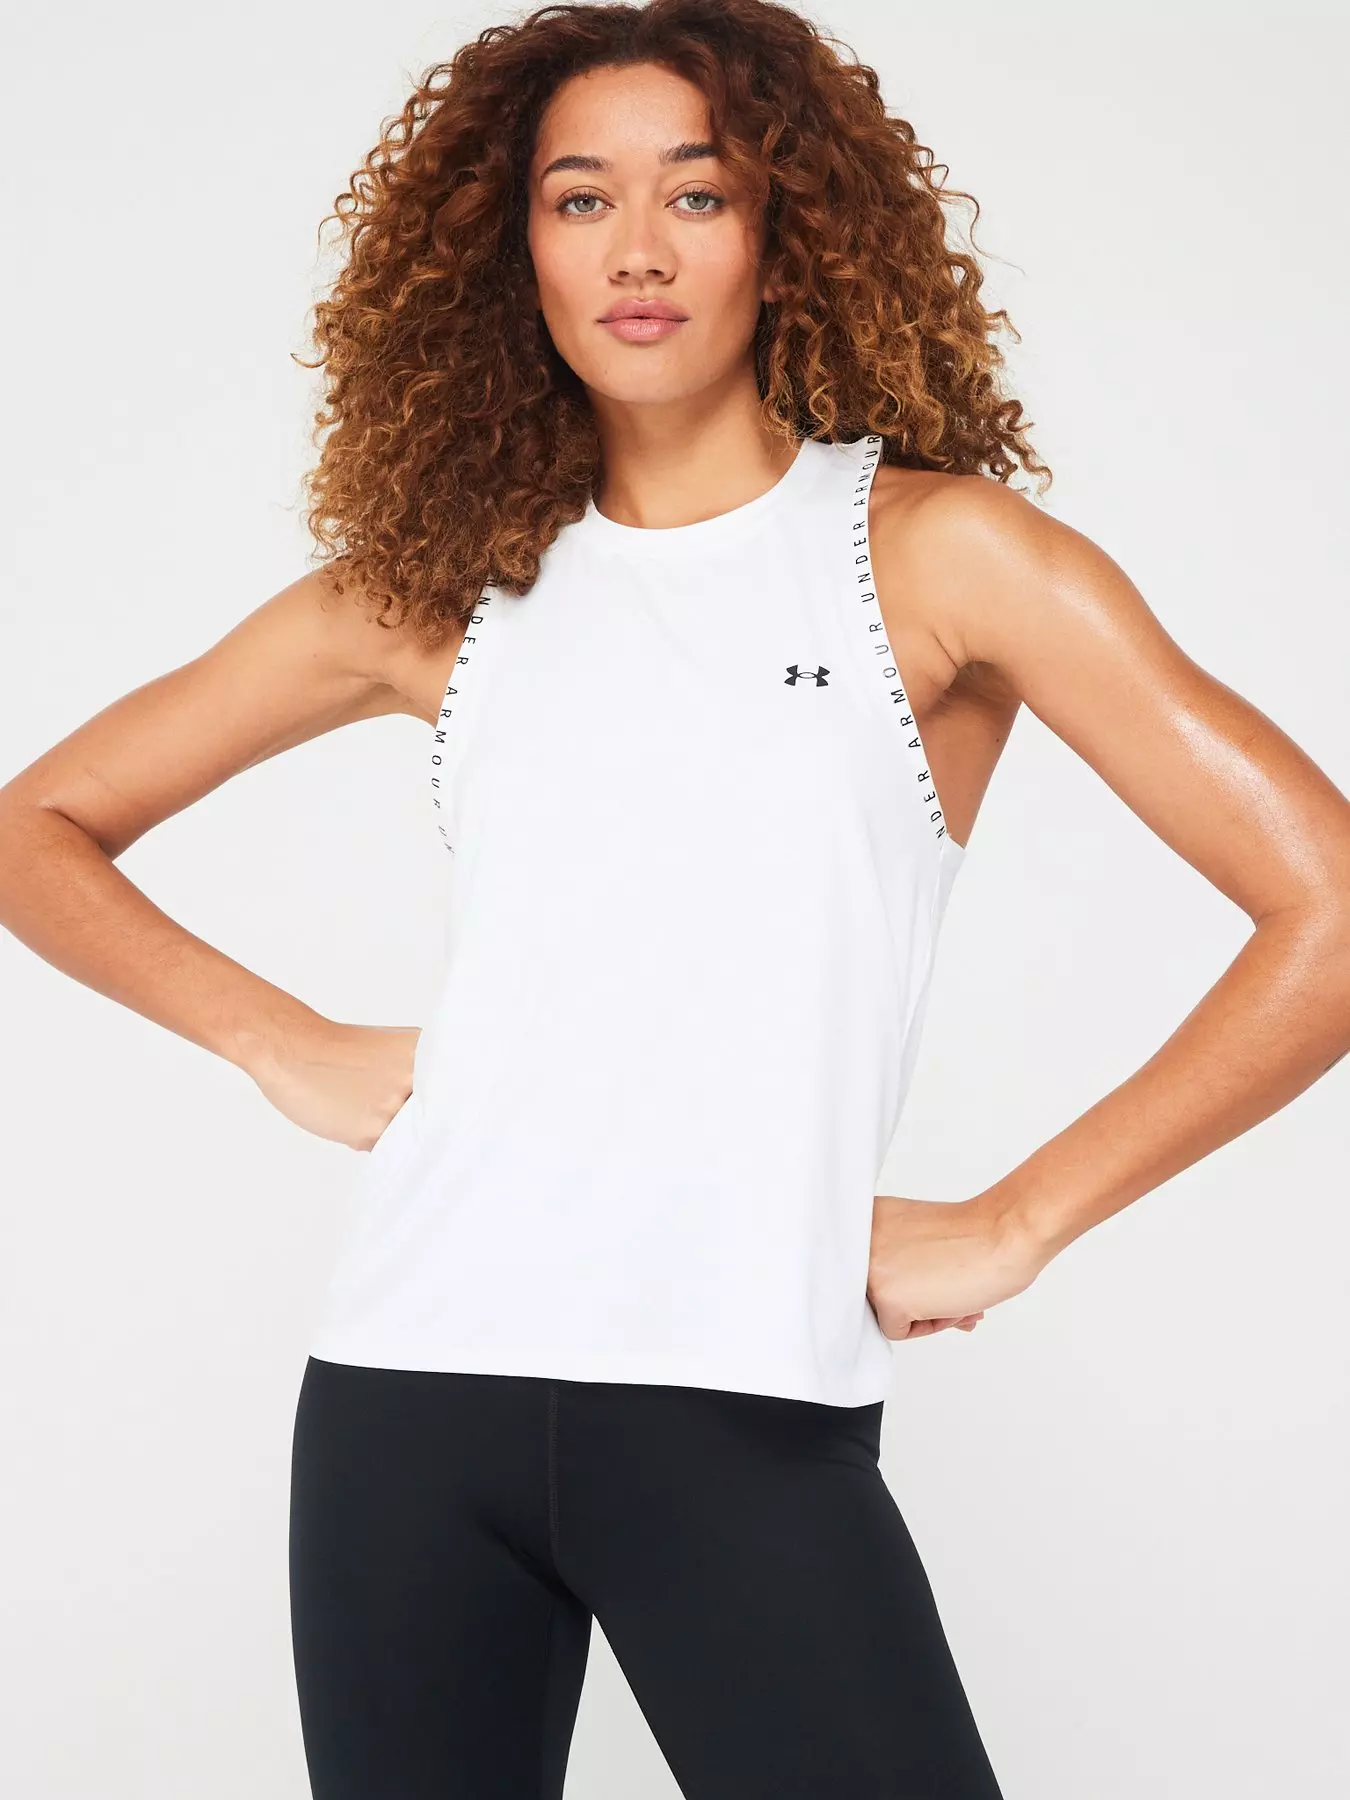 Under Armour - Womens W Freedom TB Warmup Top, X-Small, White